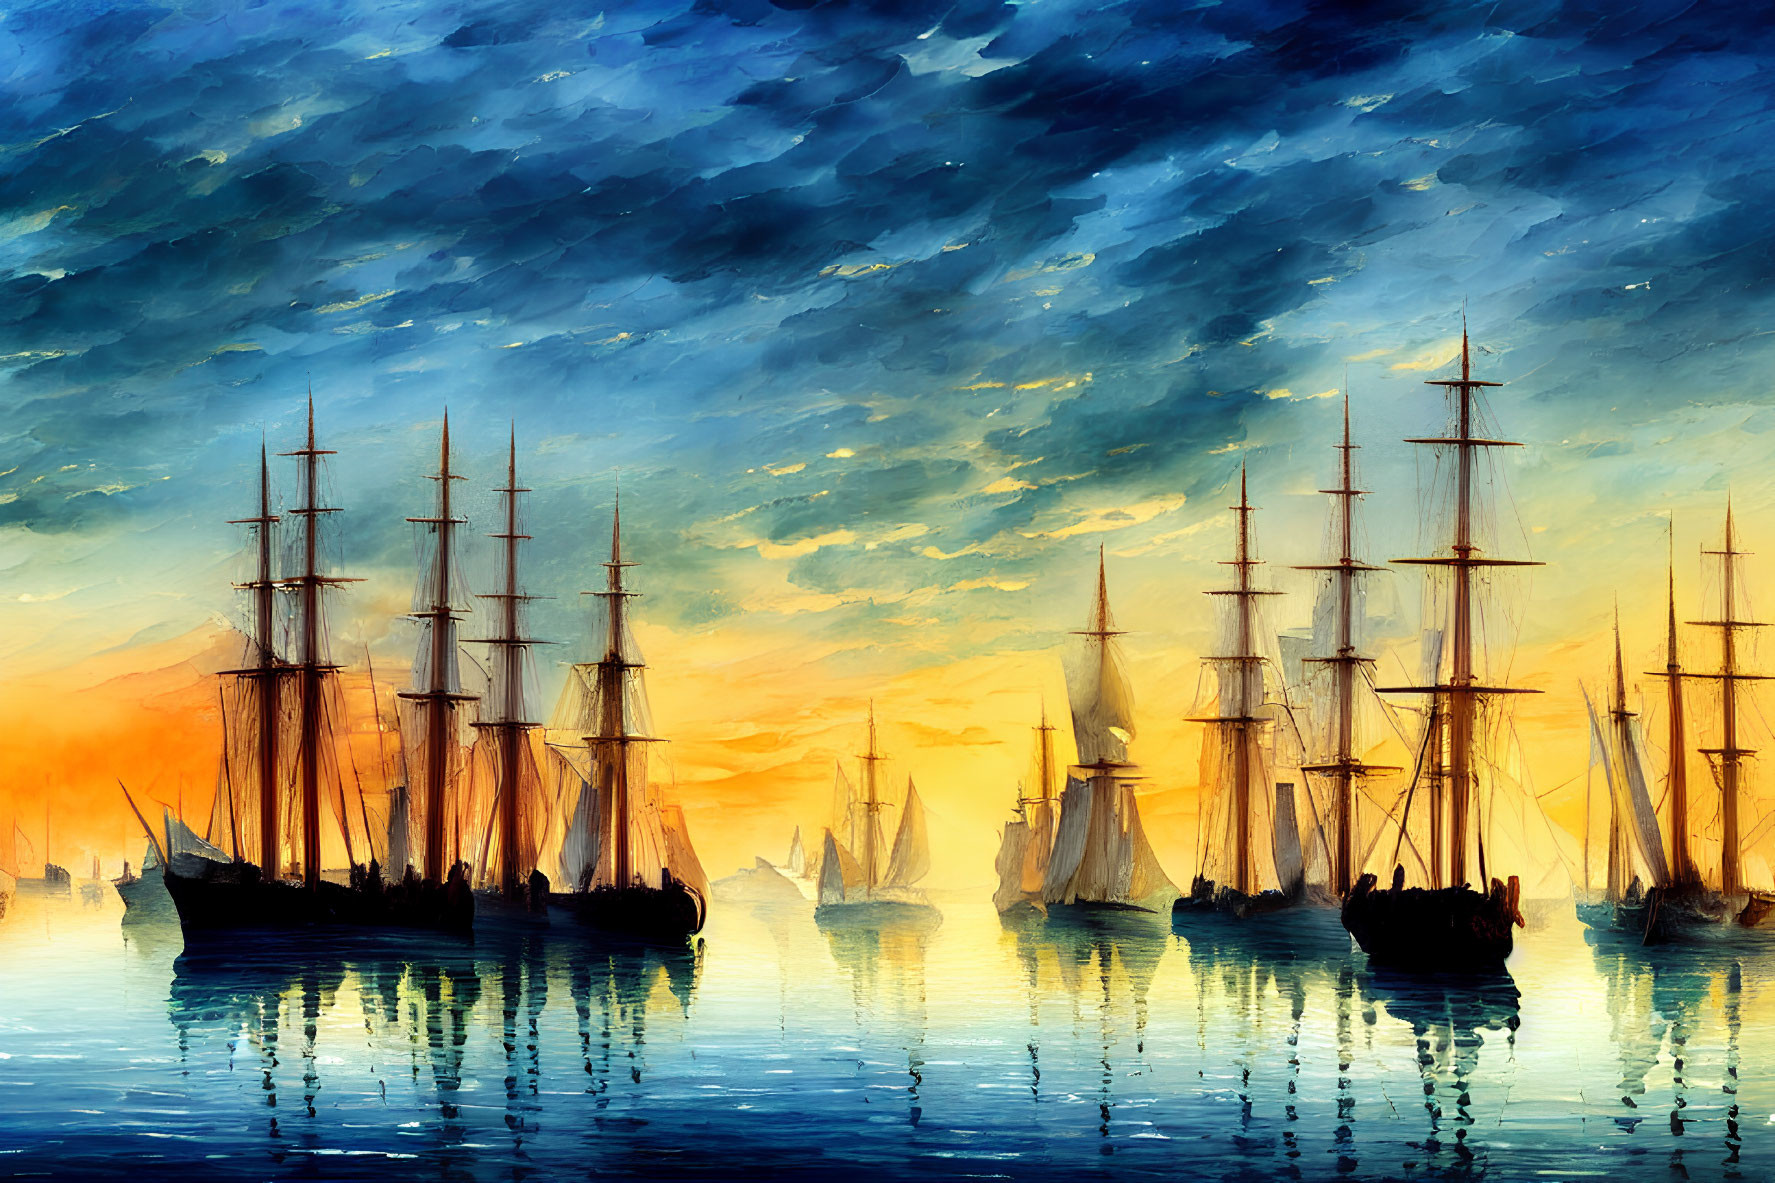 Tall ships with masts and sails at sunset over water